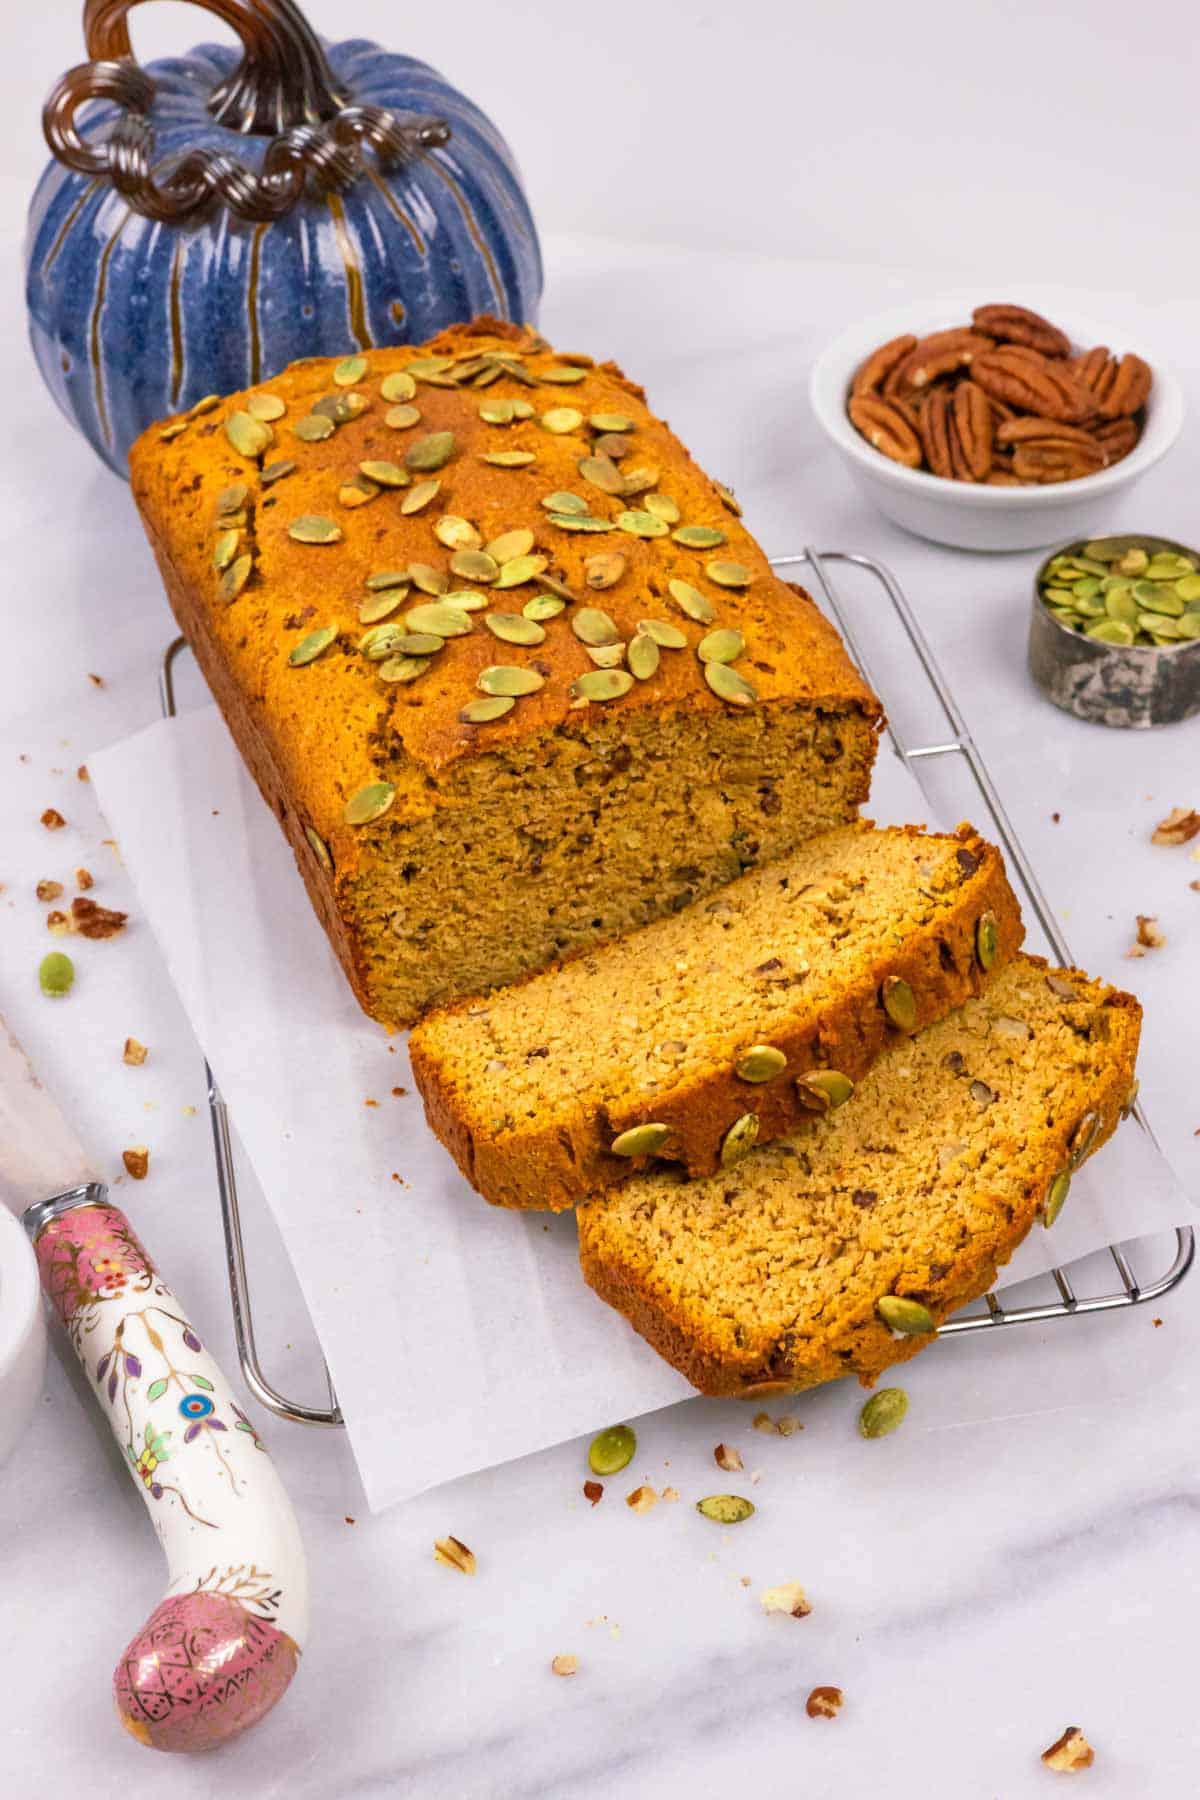 Baked loaf of pumpkin bread topped with pumpkin seeds with two slices laying in front.